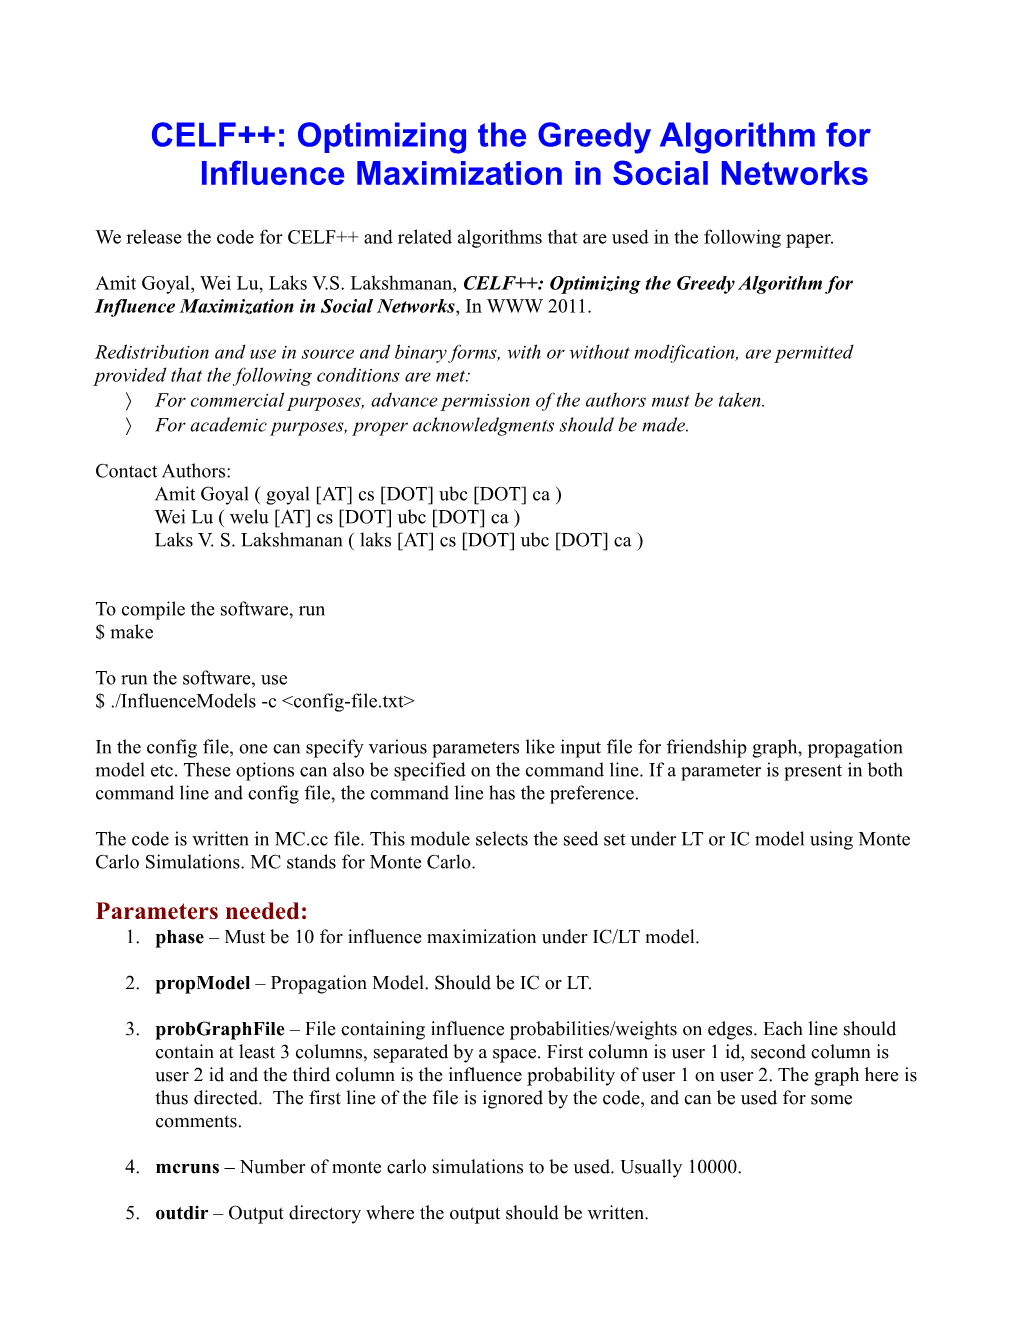 CELF : Optimizing the Greedy Algorithm for Influence Maximization in Social Networks